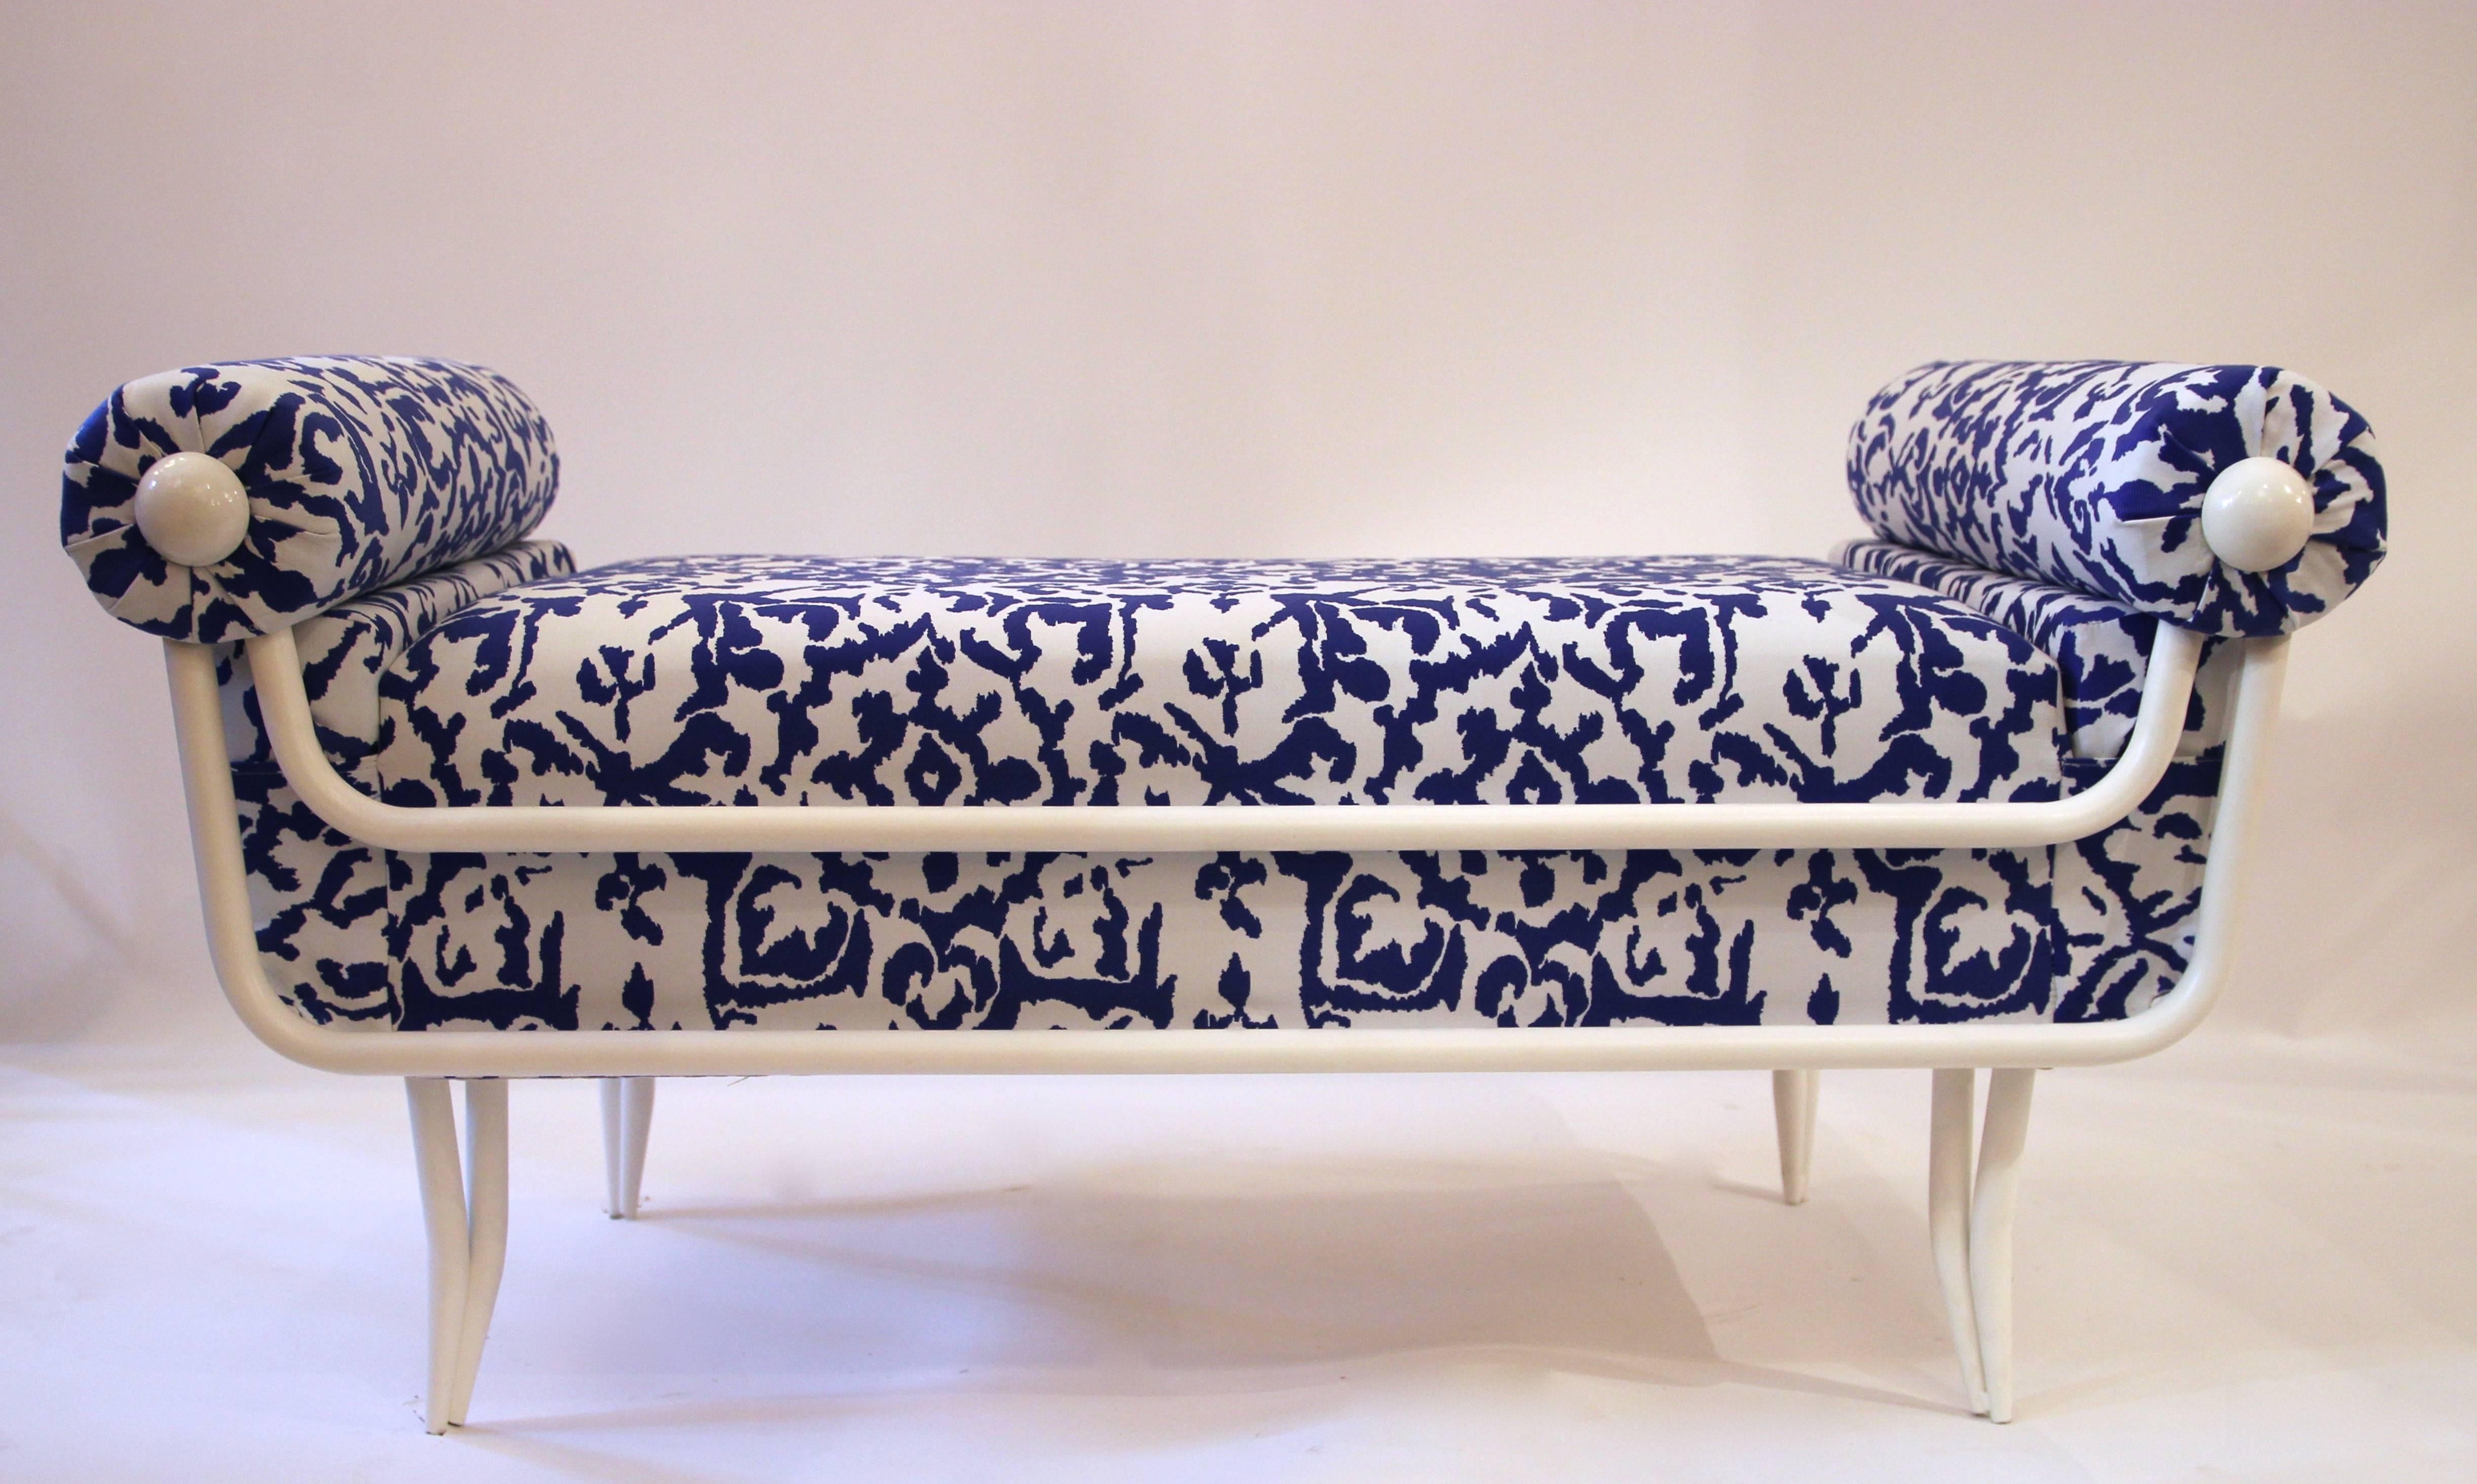 René Prou (1889-1947),
set of six sofas,
white lacquered iron, fabric and wood,
circa 1950, France.
Height: 63 cm, seat height: 50 cm,
width: 1m23, depth: 67 cm.